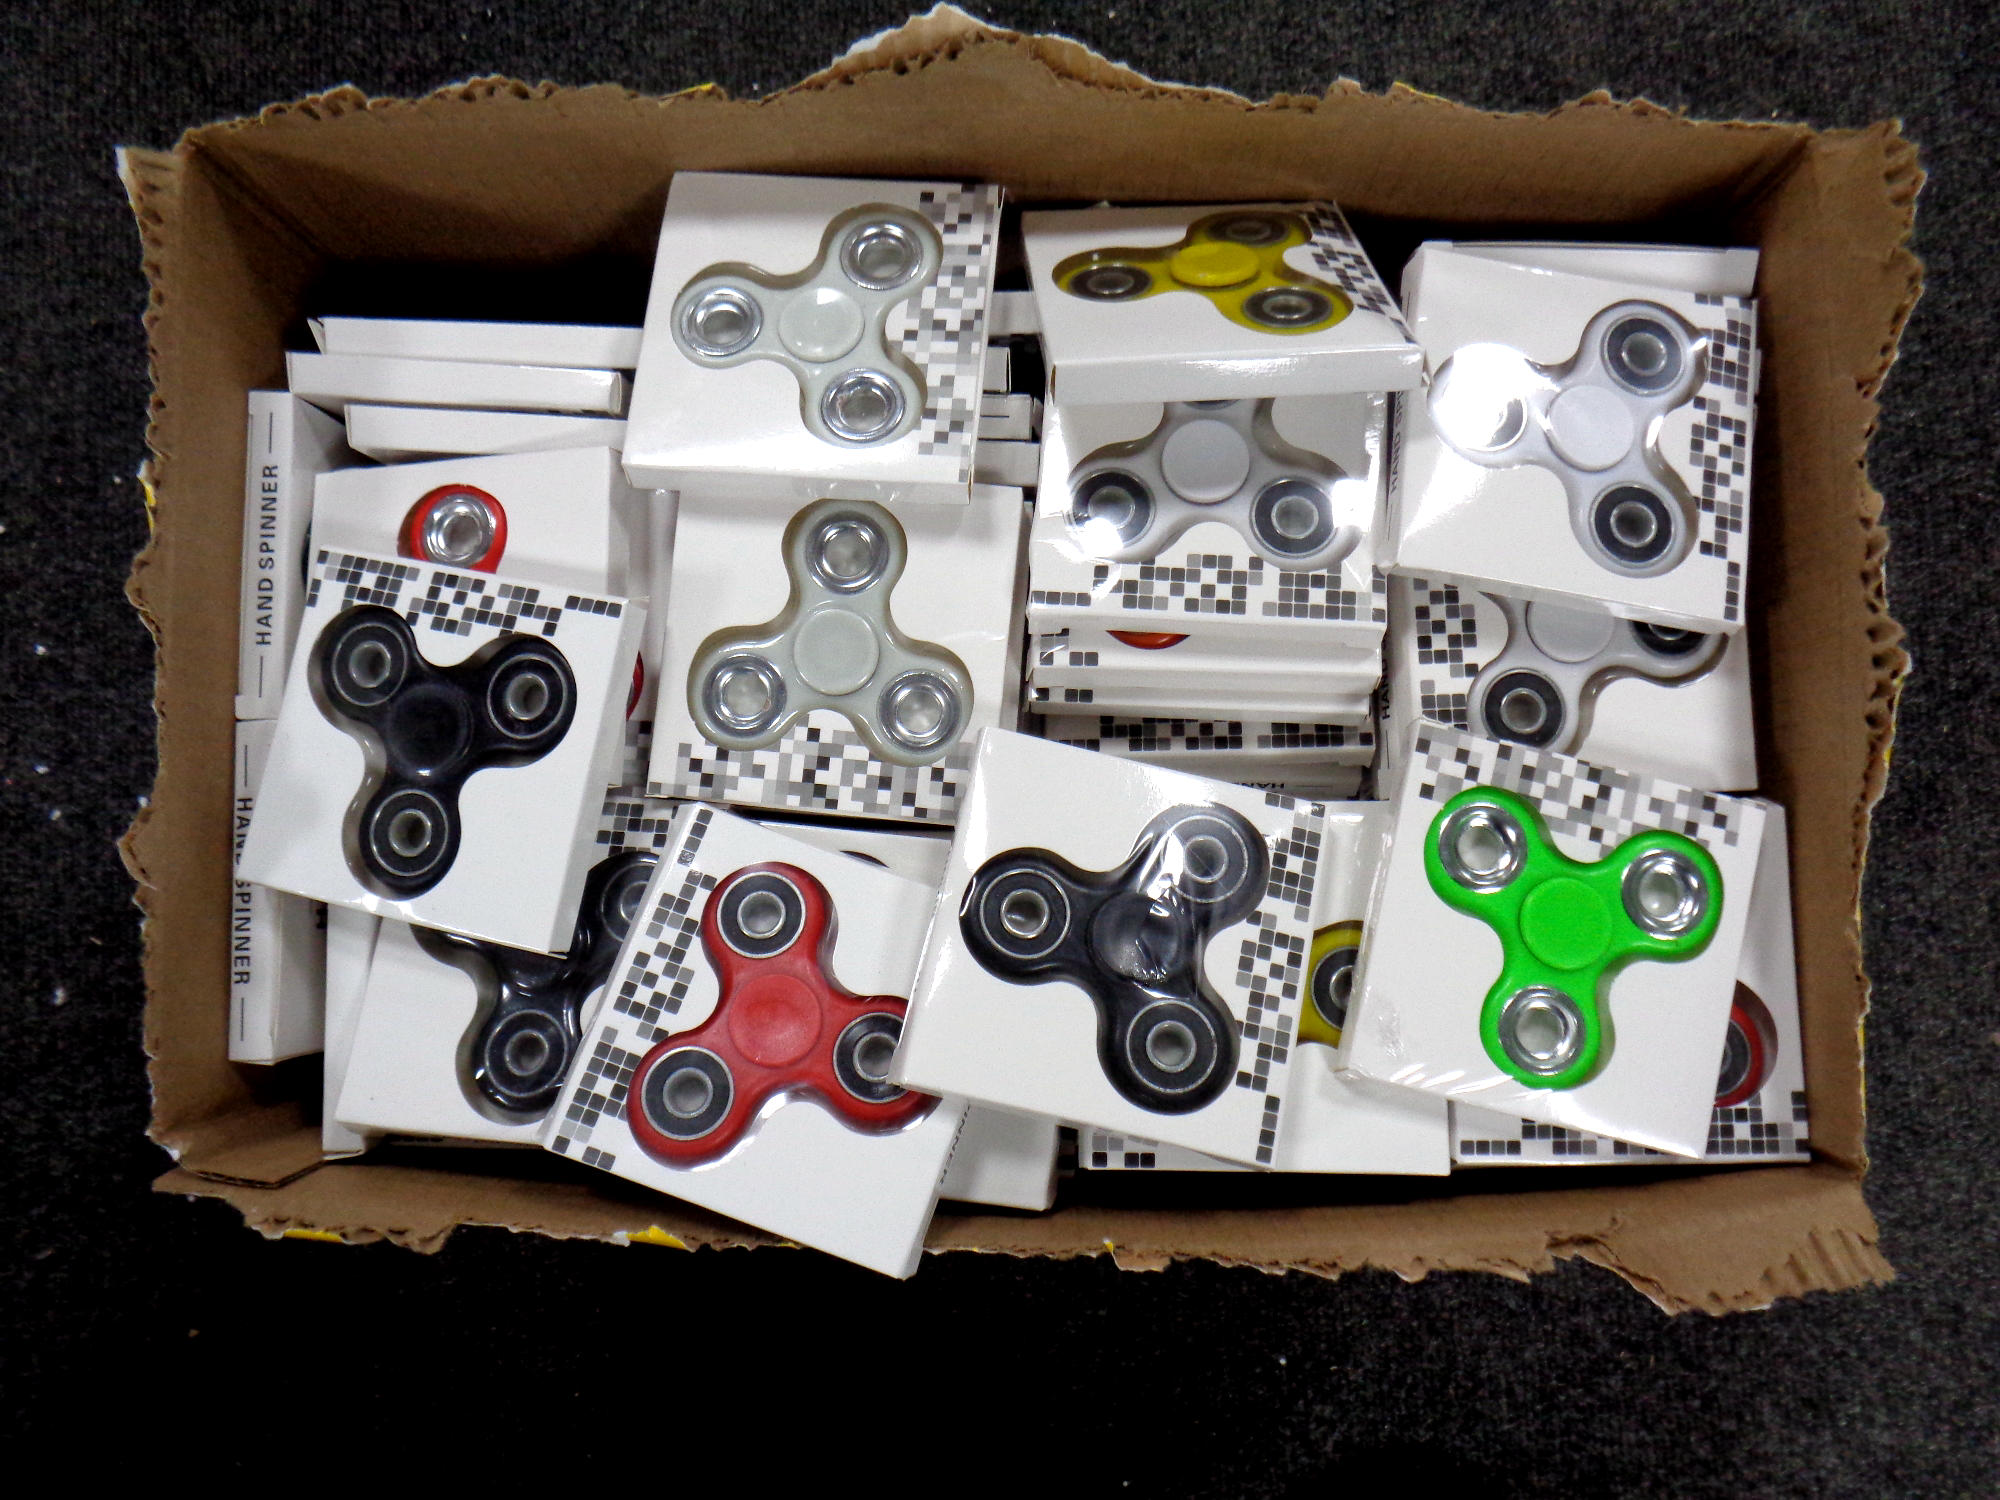 A box containing a large quantity of fidget spinners